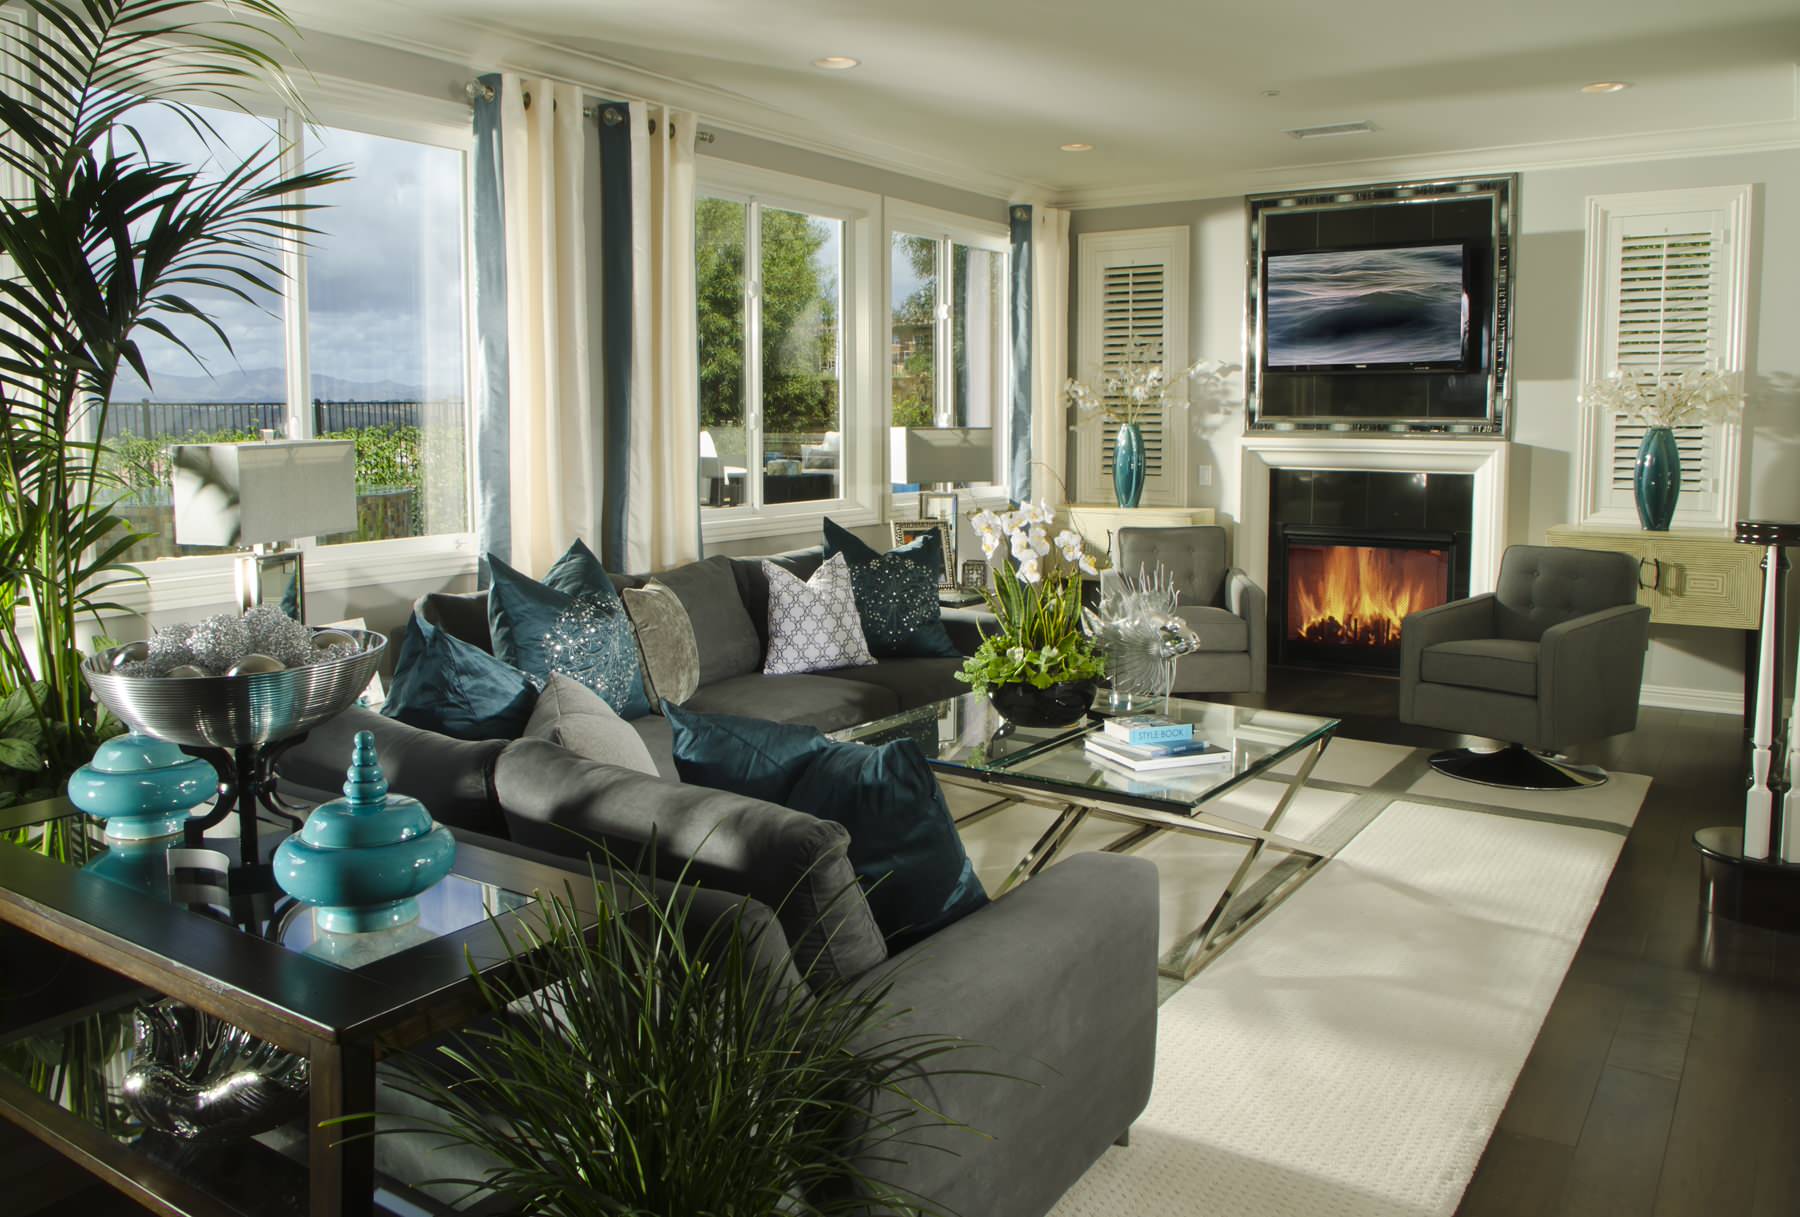 Teal Couch Houzz, Teal And Gray Living Room Decor Ideas